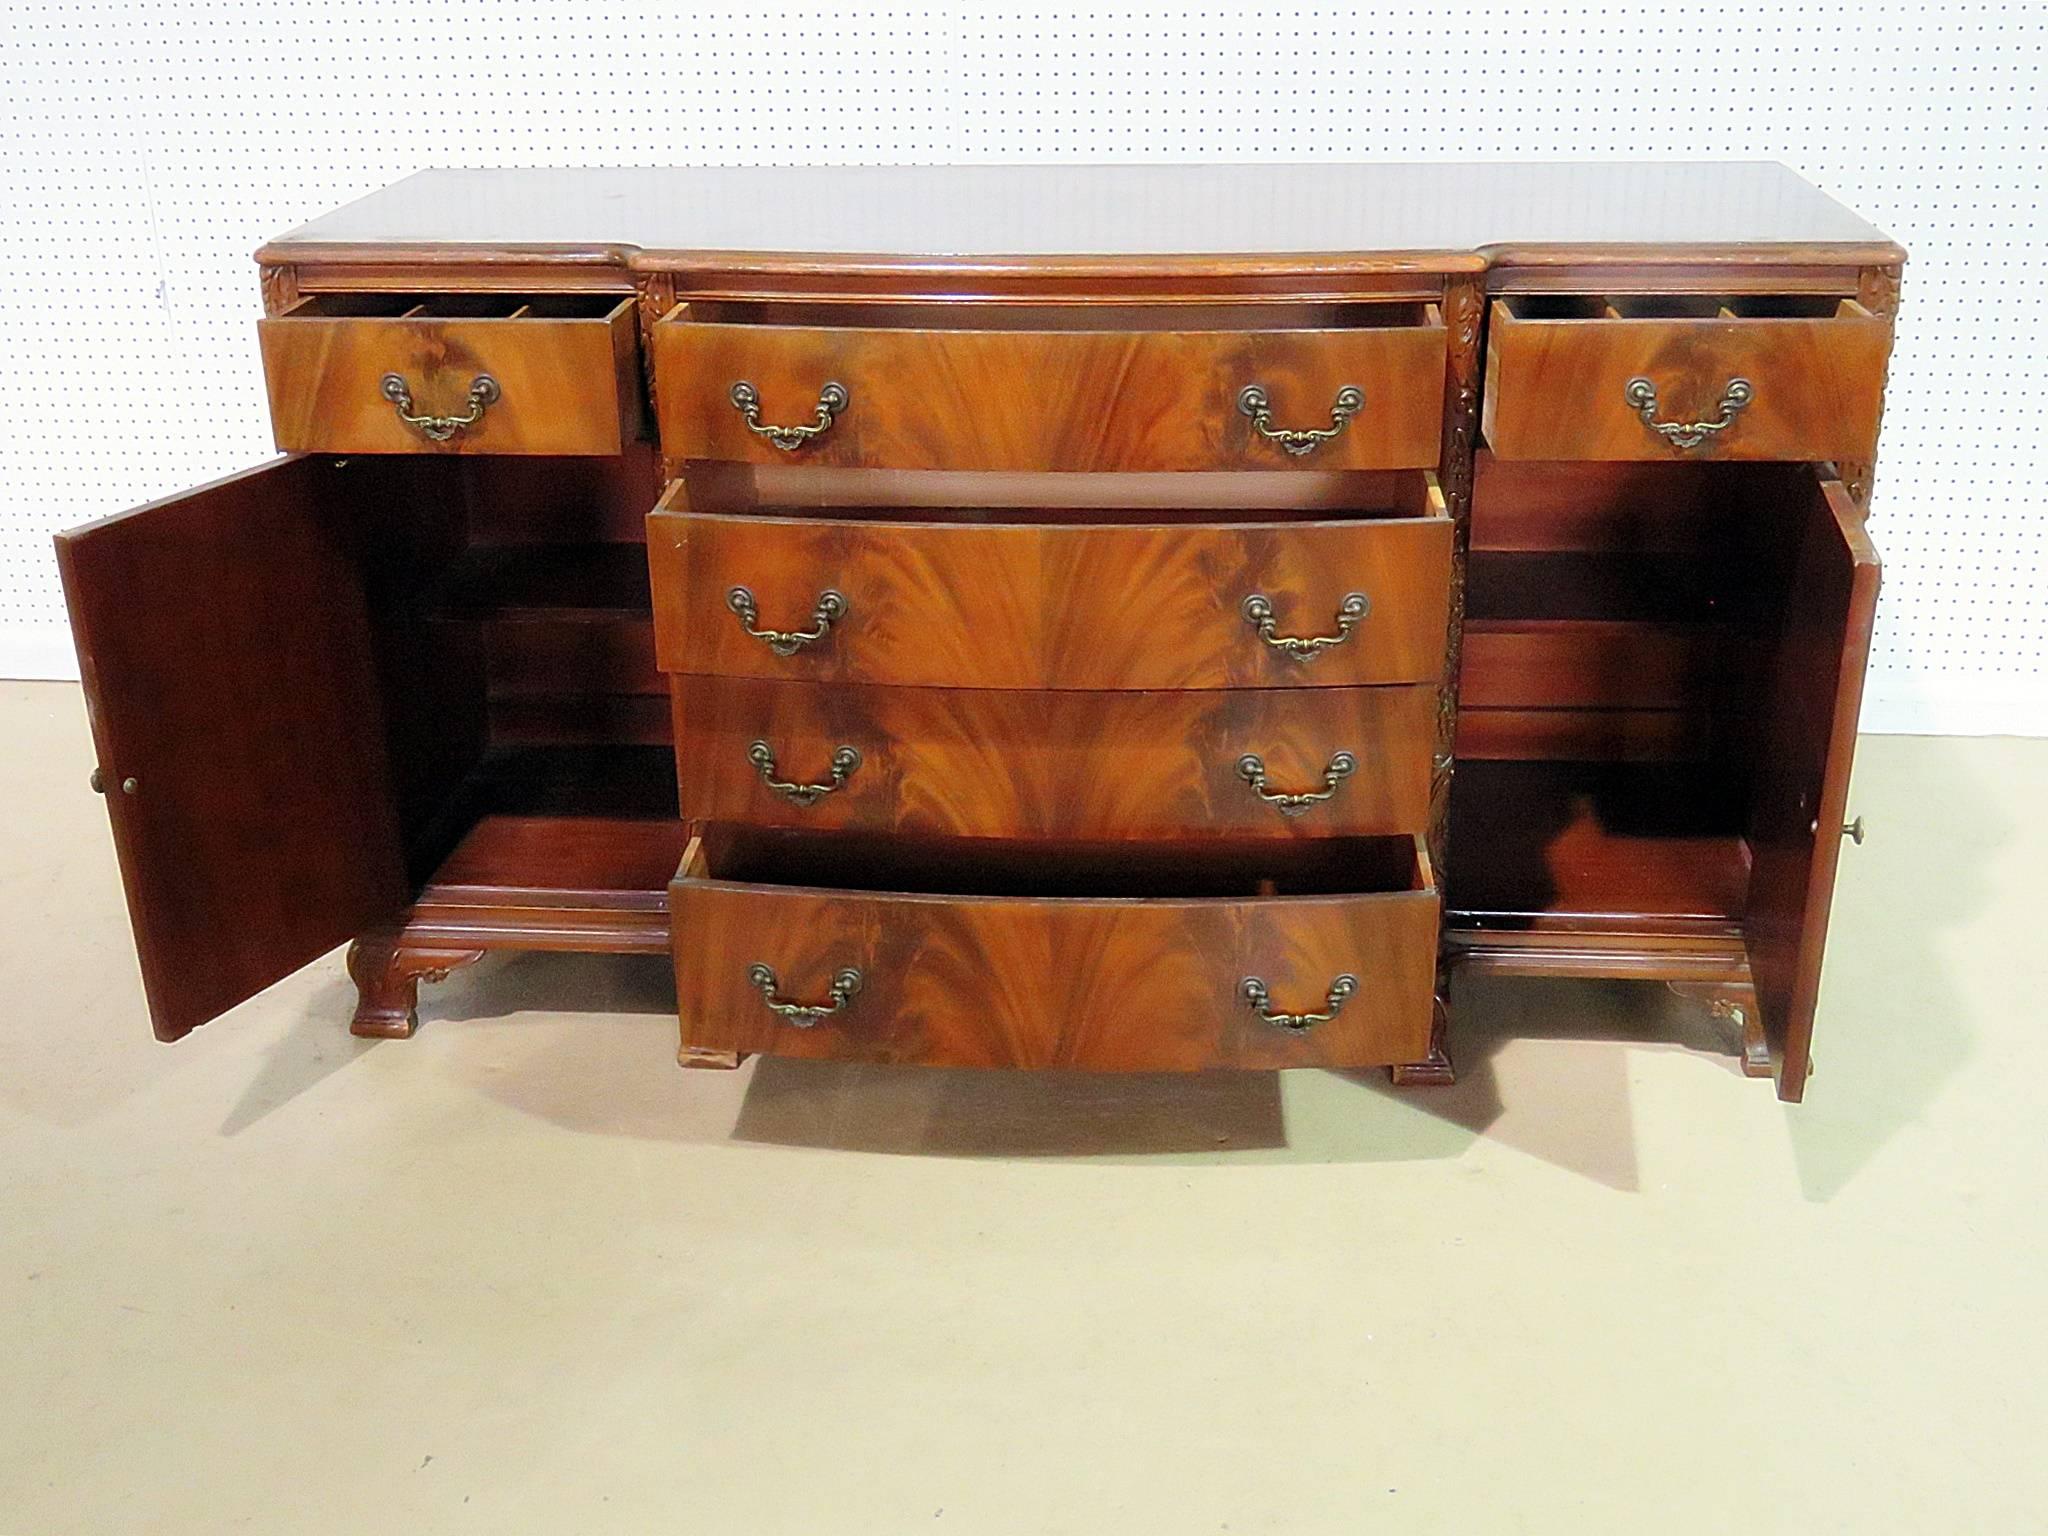 Georgian style flame mahogany sideboard with six drawers and two drawers, each containing one shelf.